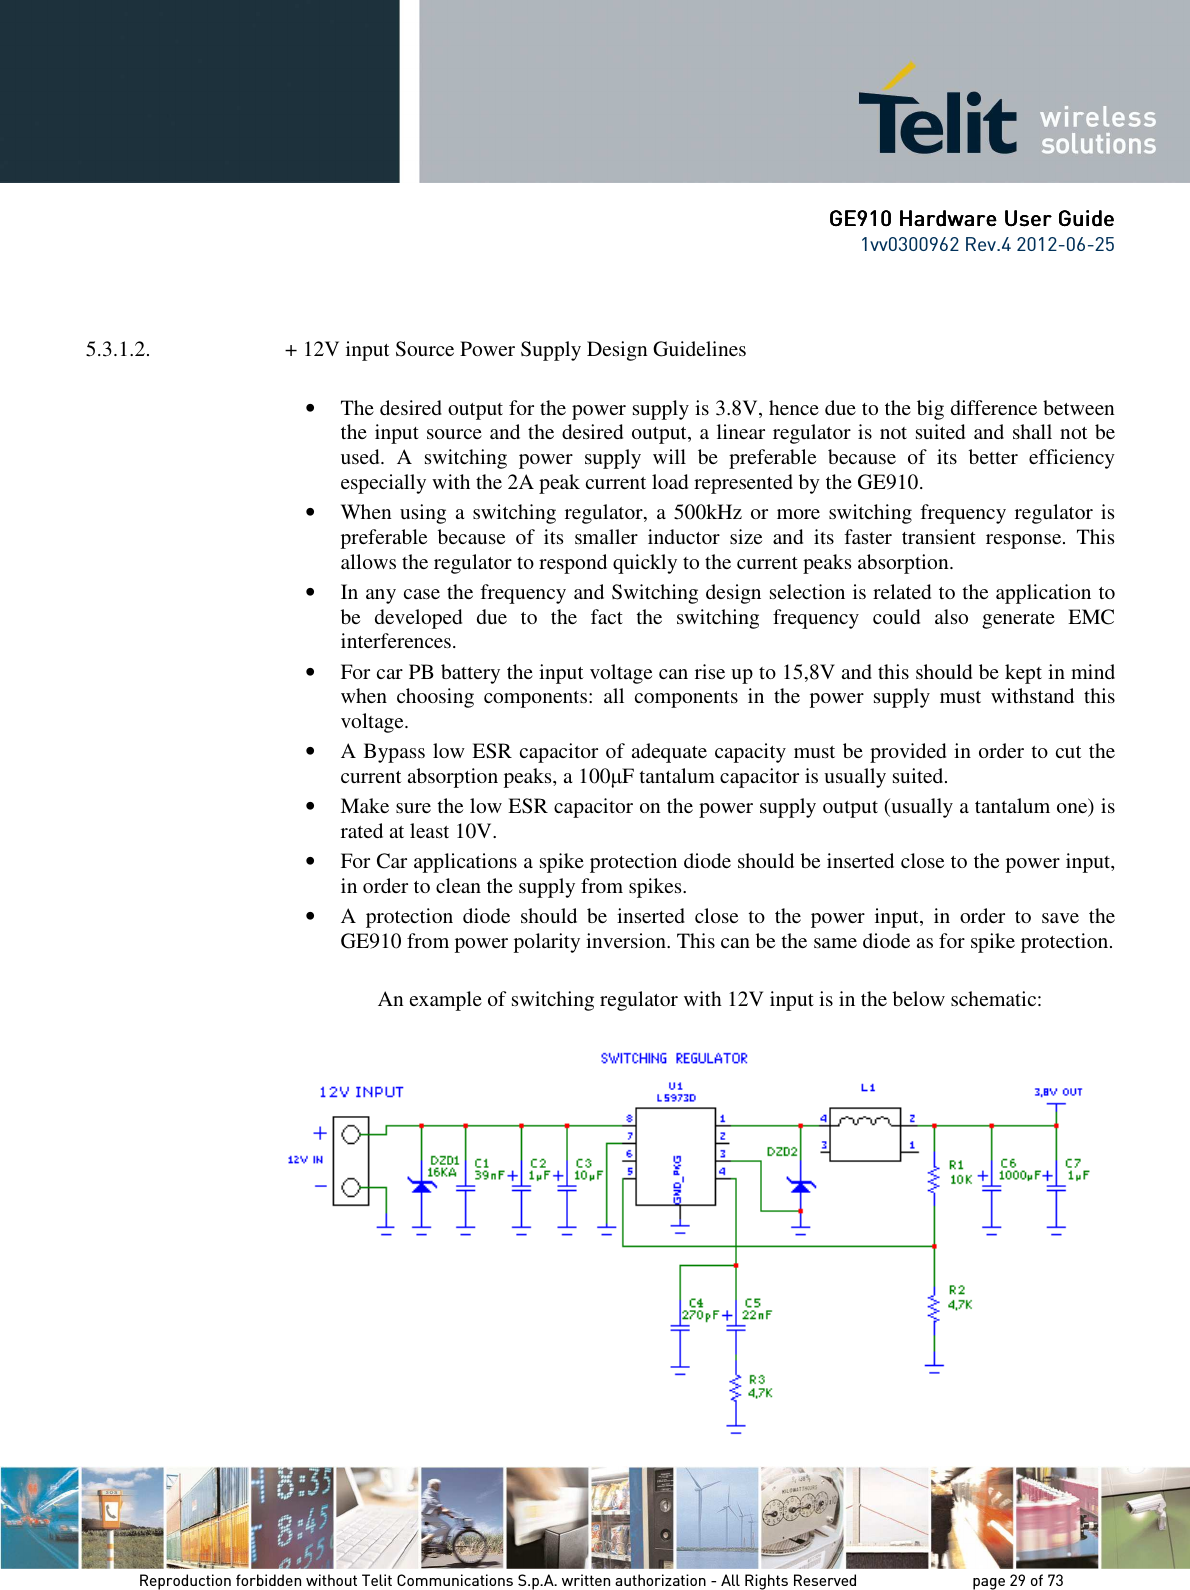      GE9GE9GE9GE910 Hardware User Guide10 Hardware User Guide10 Hardware User Guide10 Hardware User Guide    1vv0300962 Rev.4 2012-06-25    Reproduction forbidden without Telit Communications S.p.A. written authorization - All Rights Reserved    page 29 of 73 Mod. 0805 2011-07 Rev.2   5.3.1.2.  + 12V input Source Power Supply Design Guidelines  • The desired output for the power supply is 3.8V, hence due to the big difference between the input source and the desired output, a linear regulator is not suited and shall not be used.  A  switching  power  supply  will  be  preferable  because  of  its  better  efficiency especially with the 2A peak current load represented by the GE910. • When using a switching regulator, a 500kHz or more switching frequency regulator is preferable  because  of  its  smaller  inductor  size  and  its  faster  transient  response.  This allows the regulator to respond quickly to the current peaks absorption.  • In any case the frequency and Switching design selection is related to the application to be  developed  due  to  the  fact  the  switching  frequency  could  also  generate  EMC interferences. • For car PB battery the input voltage can rise up to 15,8V and this should be kept in mind when  choosing  components:  all  components  in  the  power  supply  must  withstand  this voltage. • A Bypass low ESR capacitor of adequate capacity must be provided in order to cut the current absorption peaks, a 100µF tantalum capacitor is usually suited. • Make sure the low ESR capacitor on the power supply output (usually a tantalum one) is rated at least 10V. • For Car applications a spike protection diode should be inserted close to the power input, in order to clean the supply from spikes.  • A  protection  diode  should  be  inserted  close  to  the  power  input,  in  order  to  save  the GE910 from power polarity inversion. This can be the same diode as for spike protection.  An example of switching regulator with 12V input is in the below schematic:  